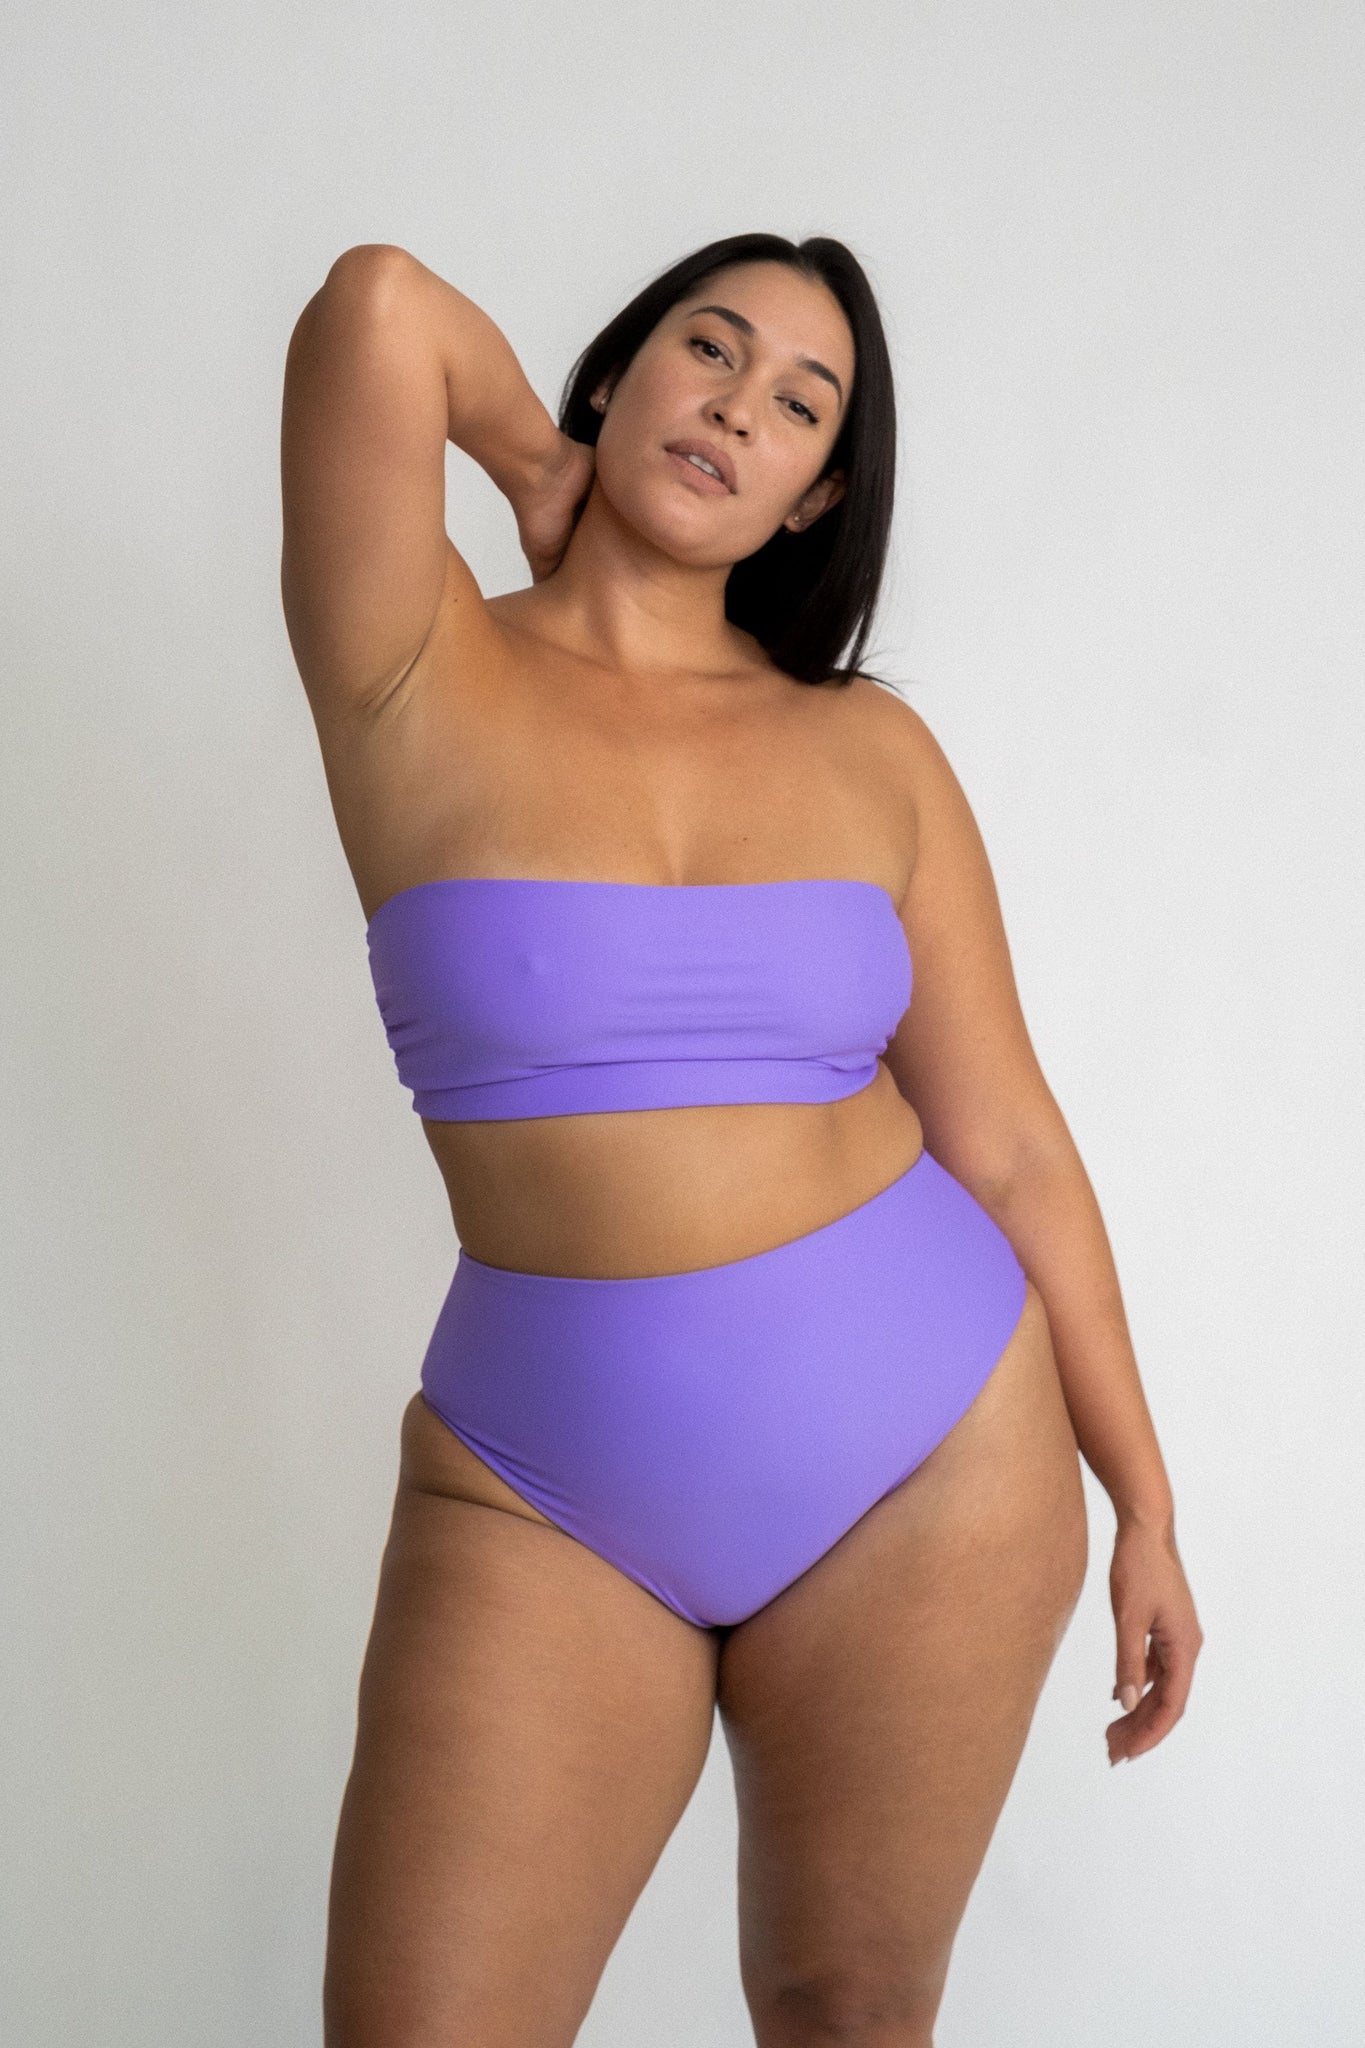 Woman standing with one arm above her head wearing high waisted bright purple bikini bottoms with a matching bright purple bandeau bikini top.